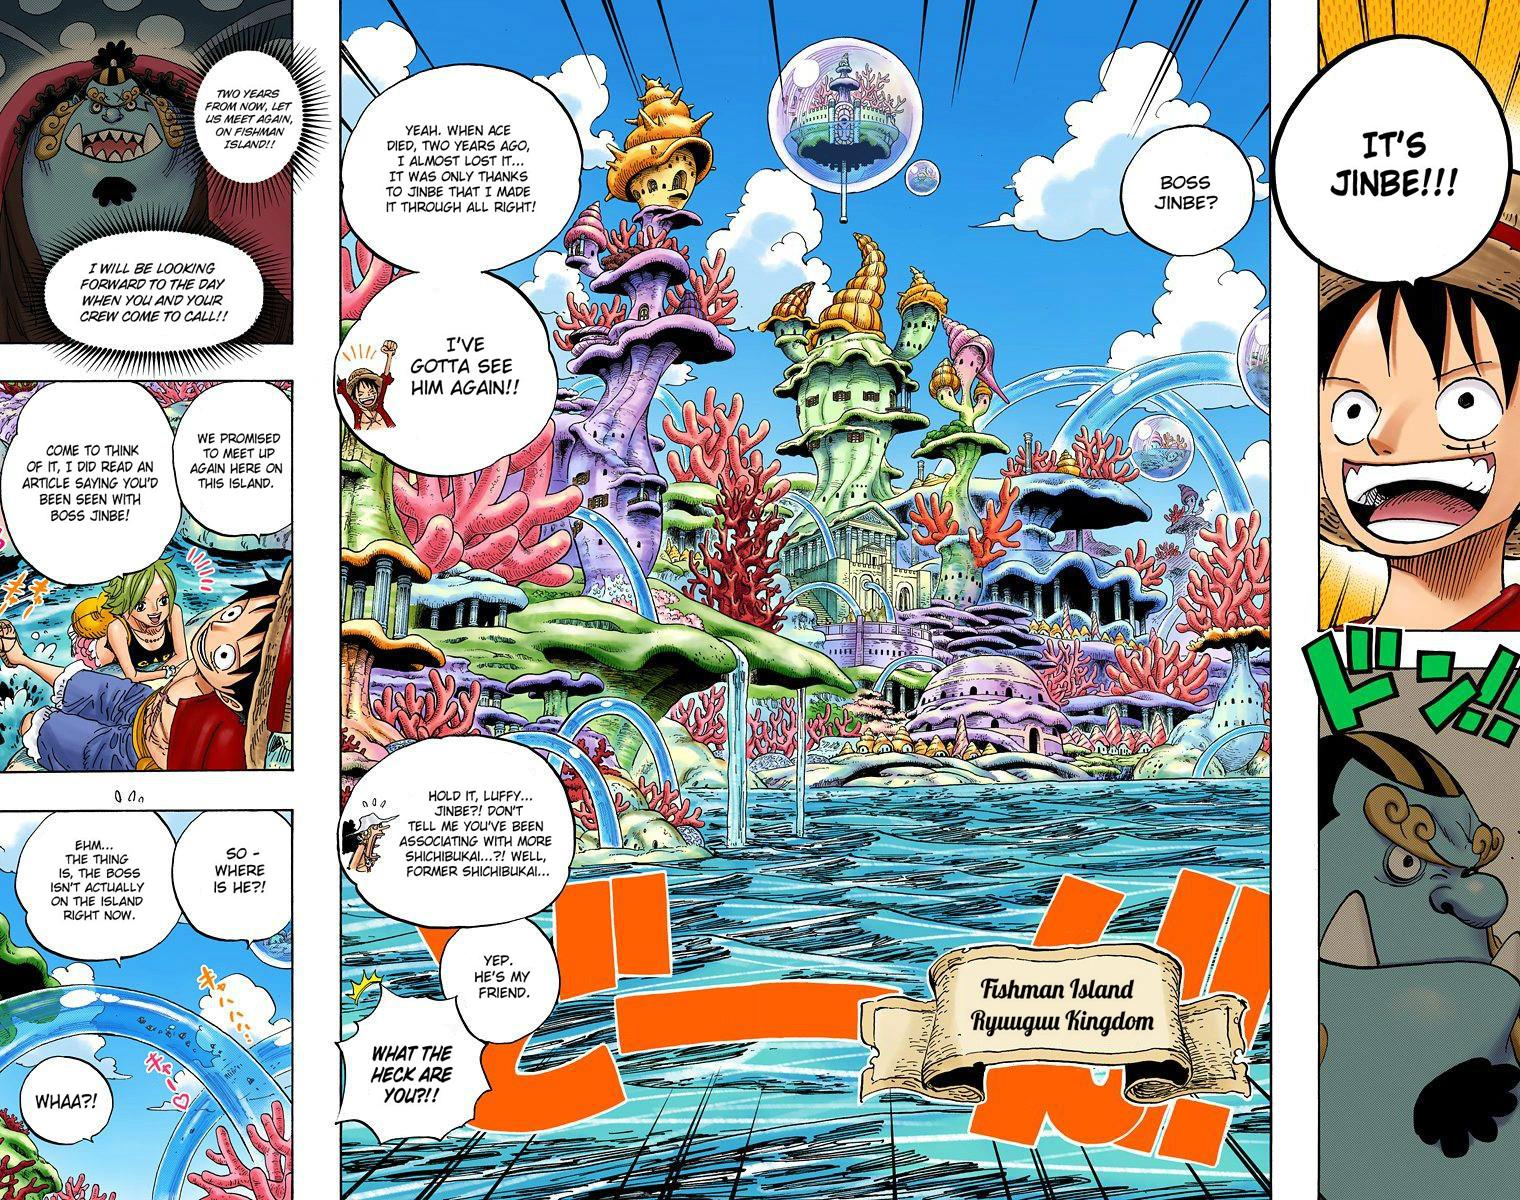 One Piece Digital Colored Comics Chapter 609 Read One Piece Digital Colored Comics Chapter 609 Online At Allmanga Us Page 4